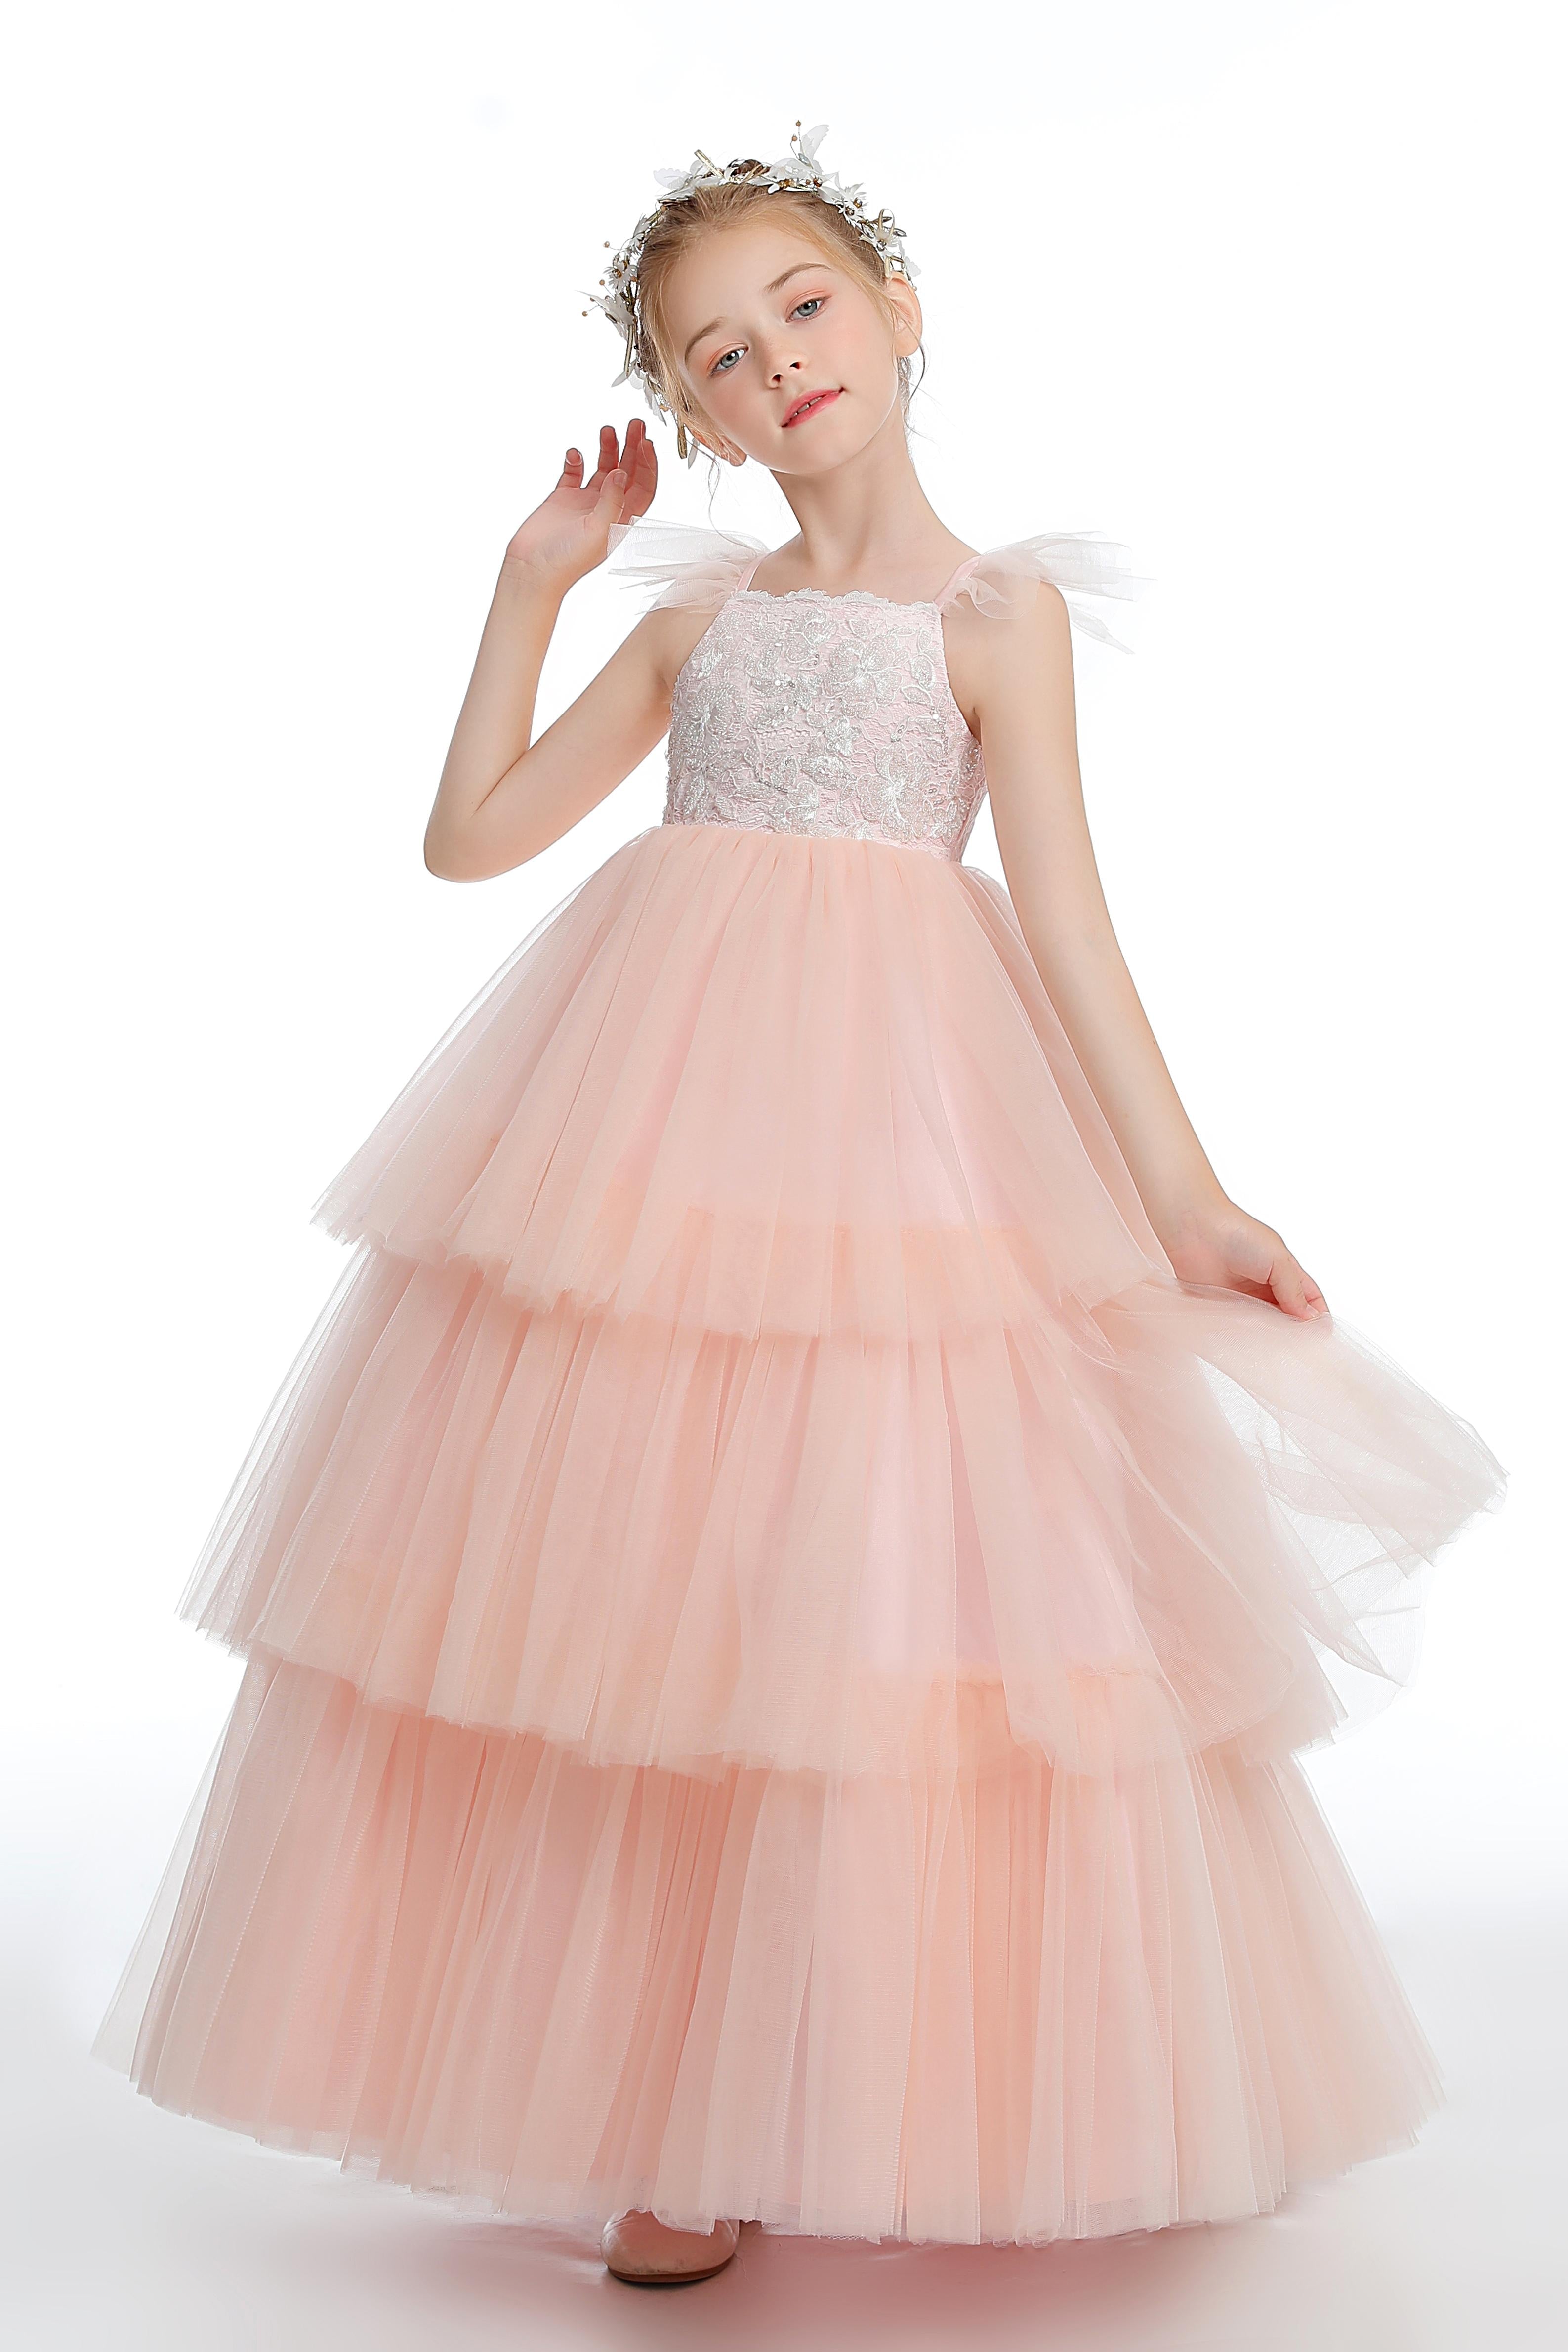 Layered Tulle Pink Ruffles Flower Girl Dress With Bowknot